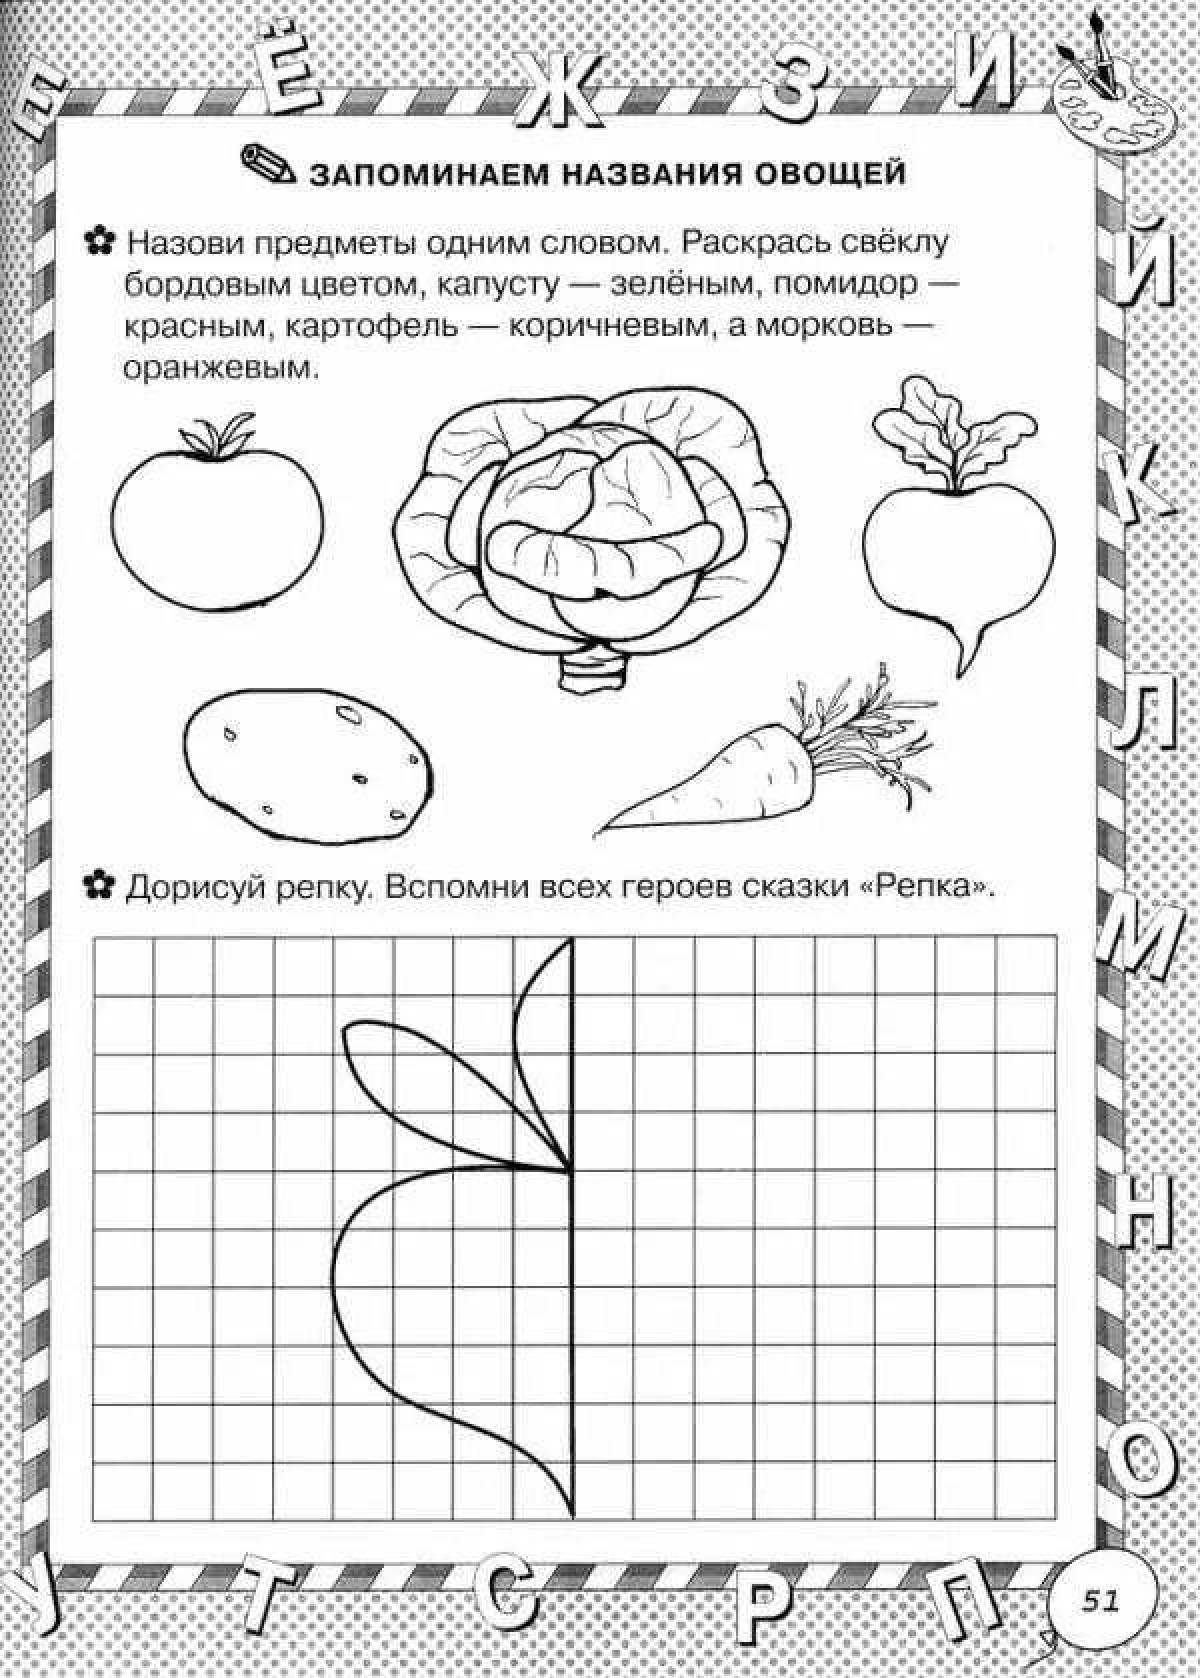 Stimulating coloring assignments for school preparation